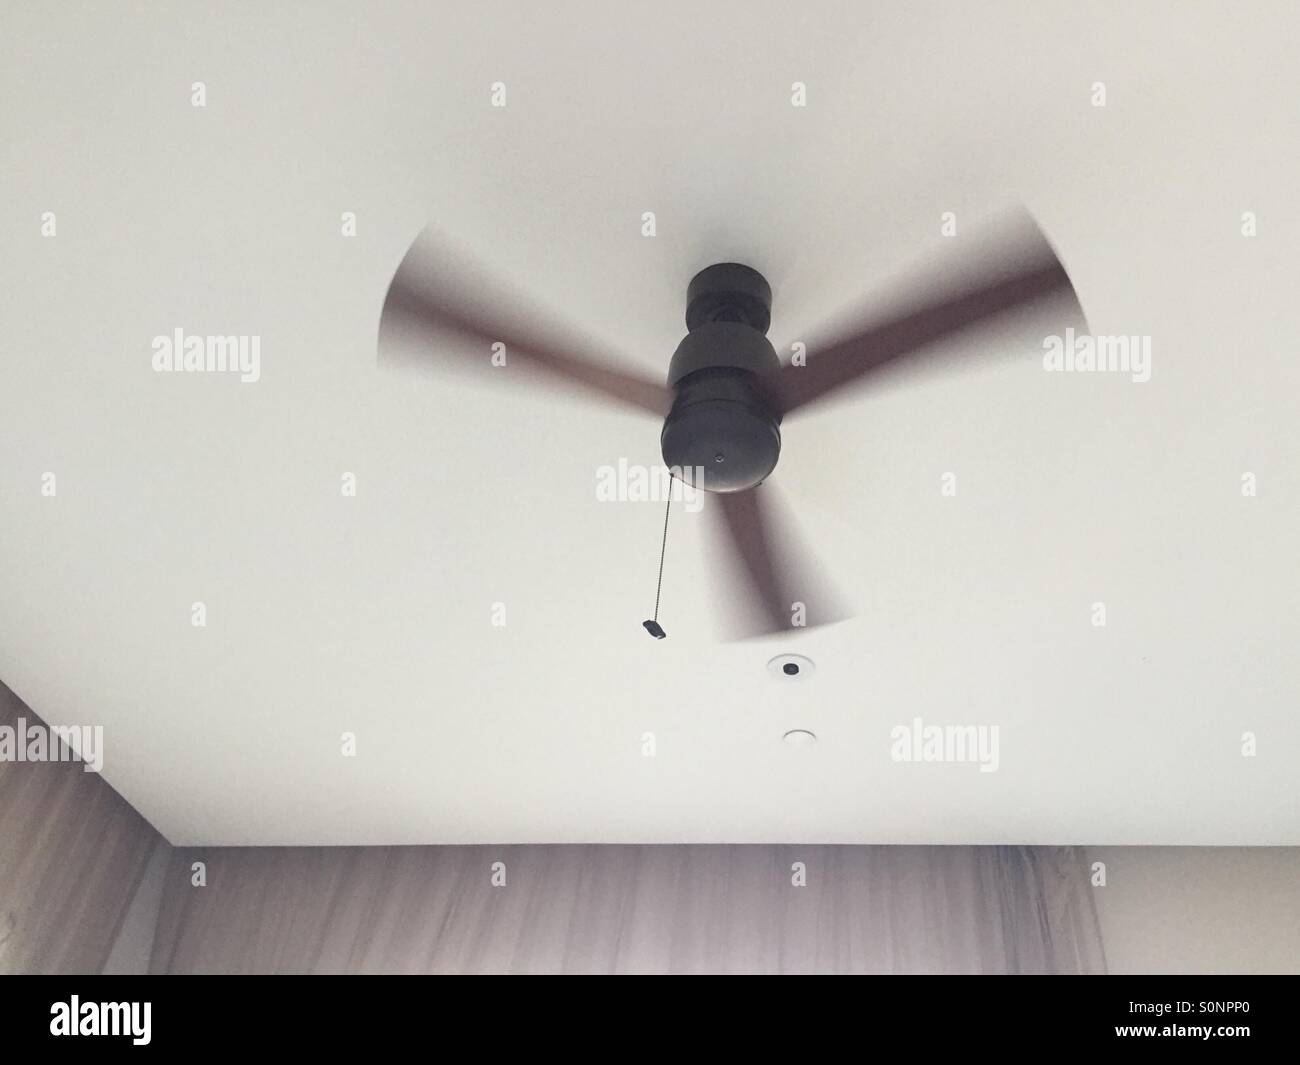 Ceiling fan in action Stock Photo